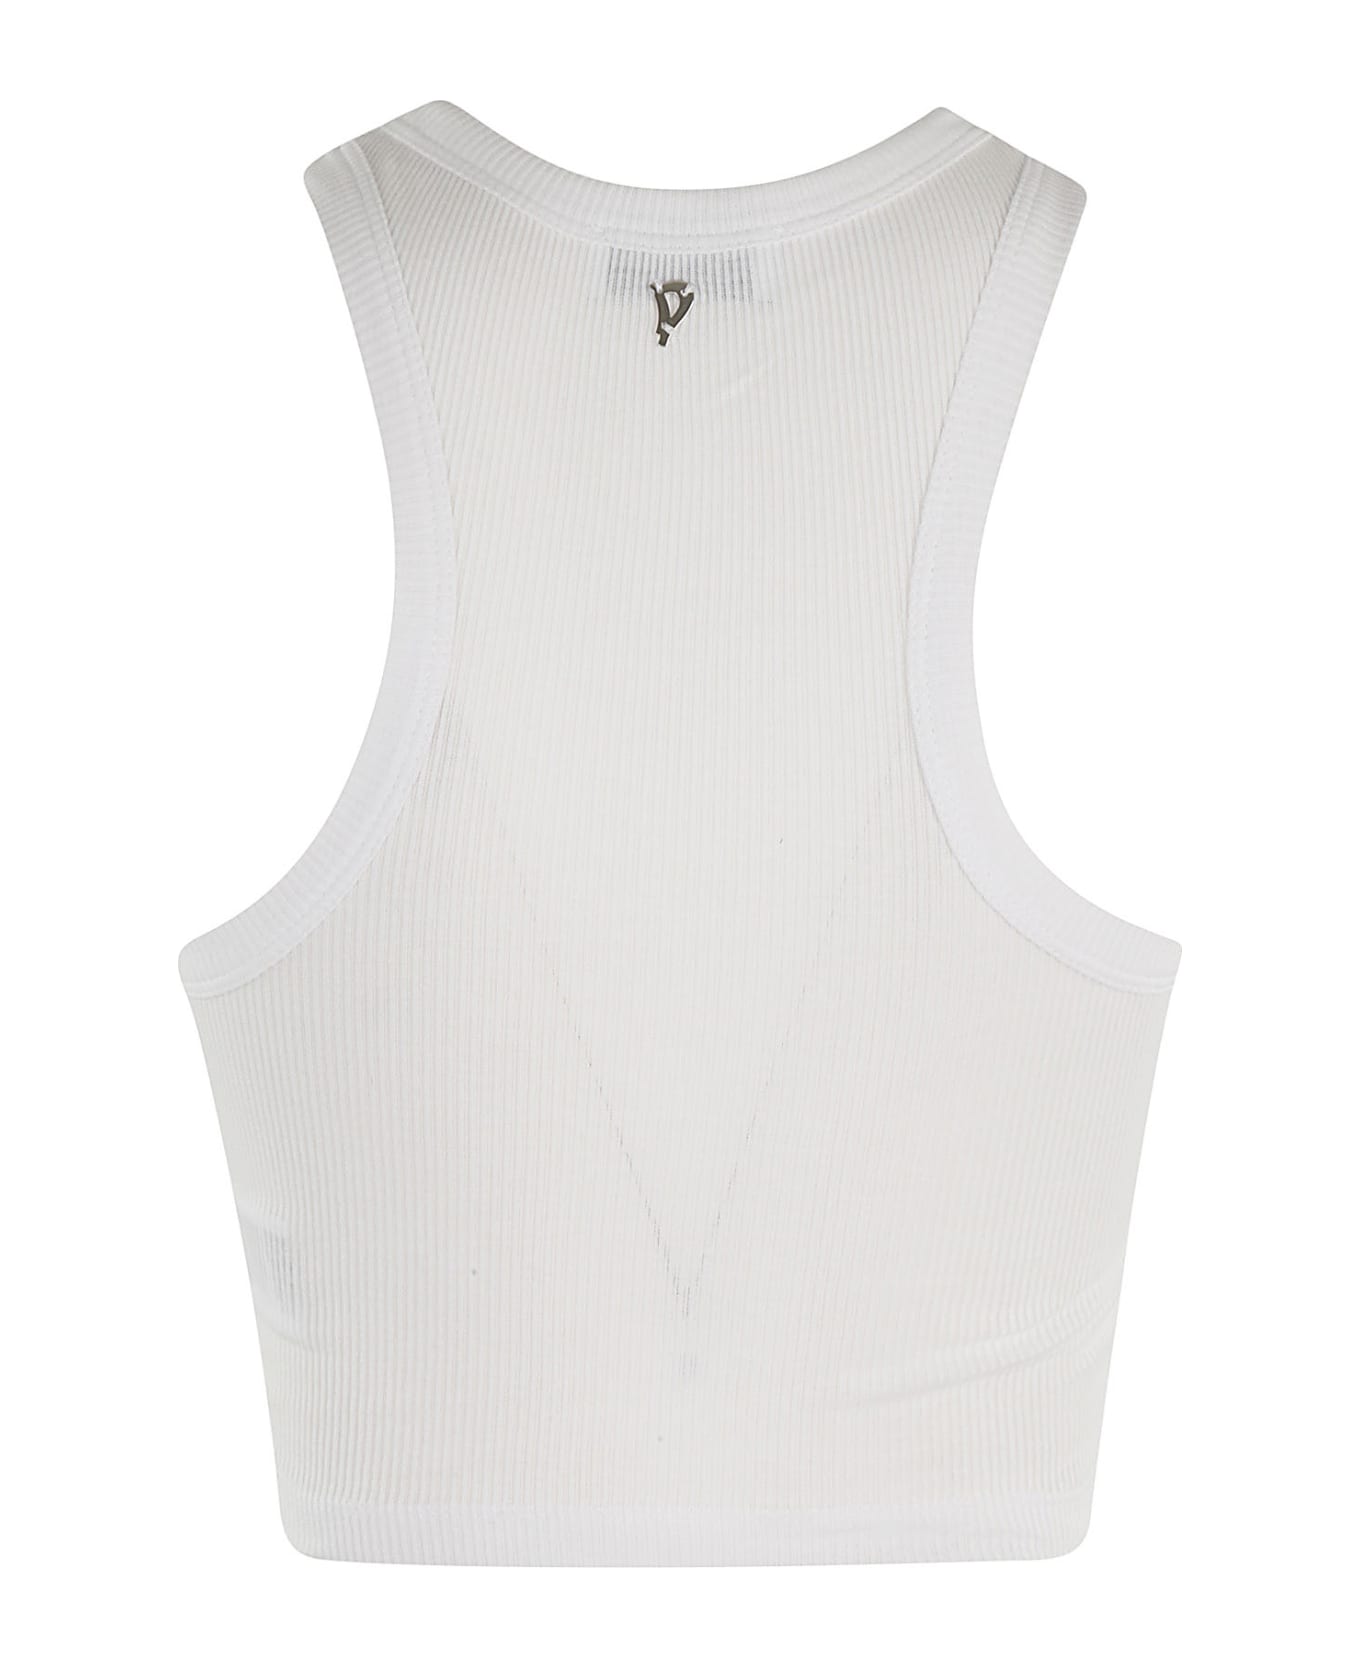 Dondup Cotton Fitted Tank Top